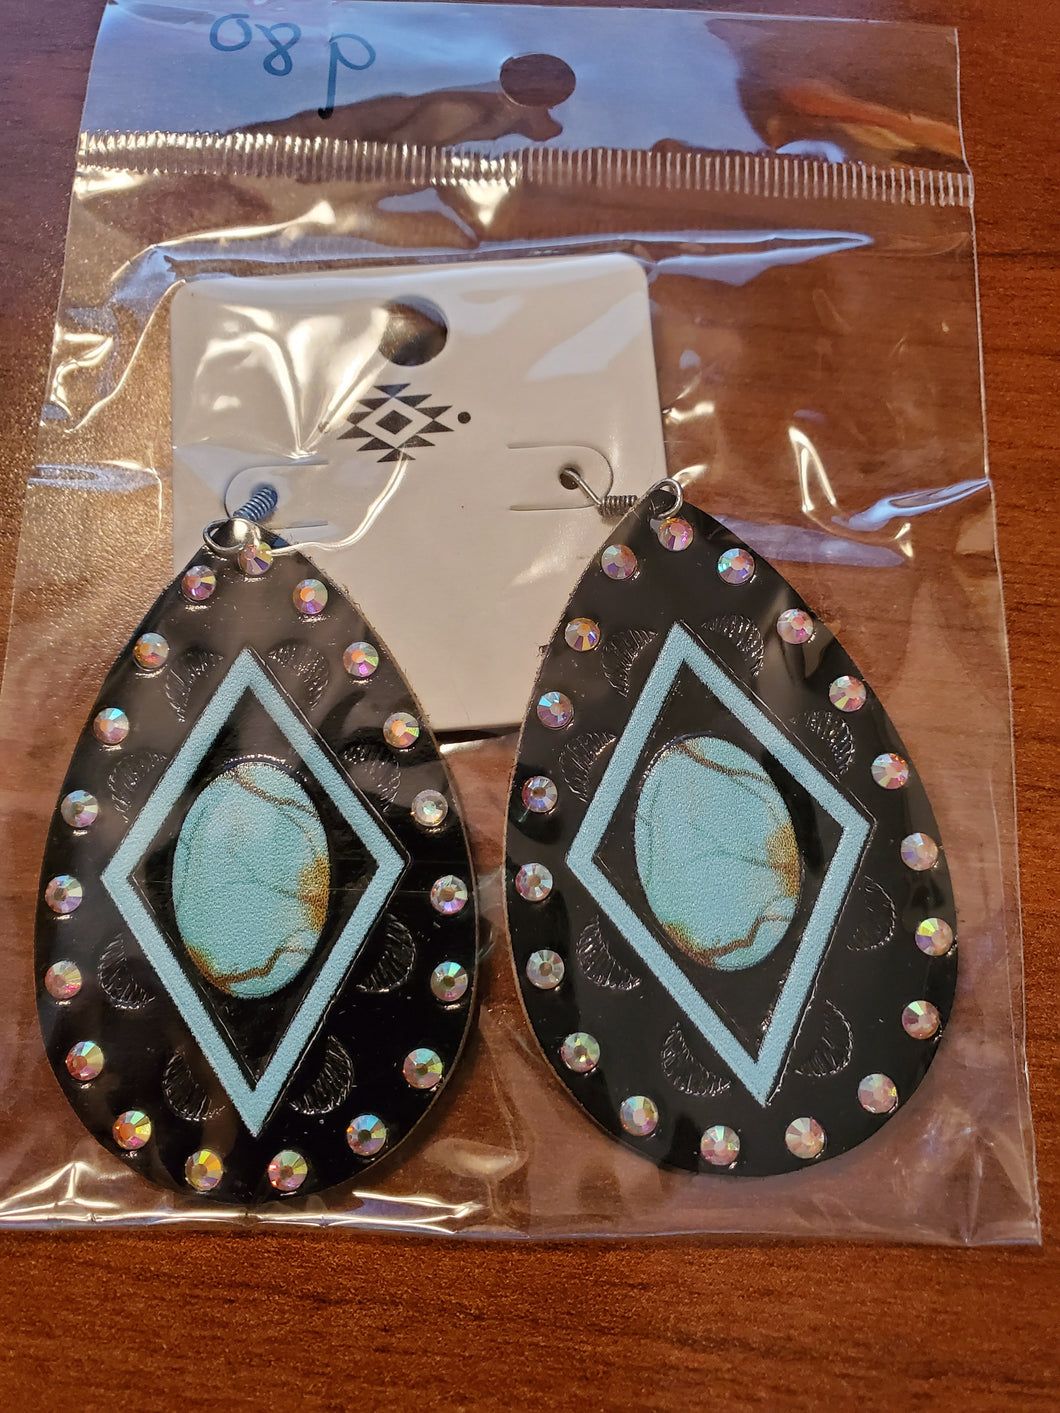 Diamond Ranch Black and Turquoise Teardrop Earrings - Unique Inspirations by Tracy and Anna